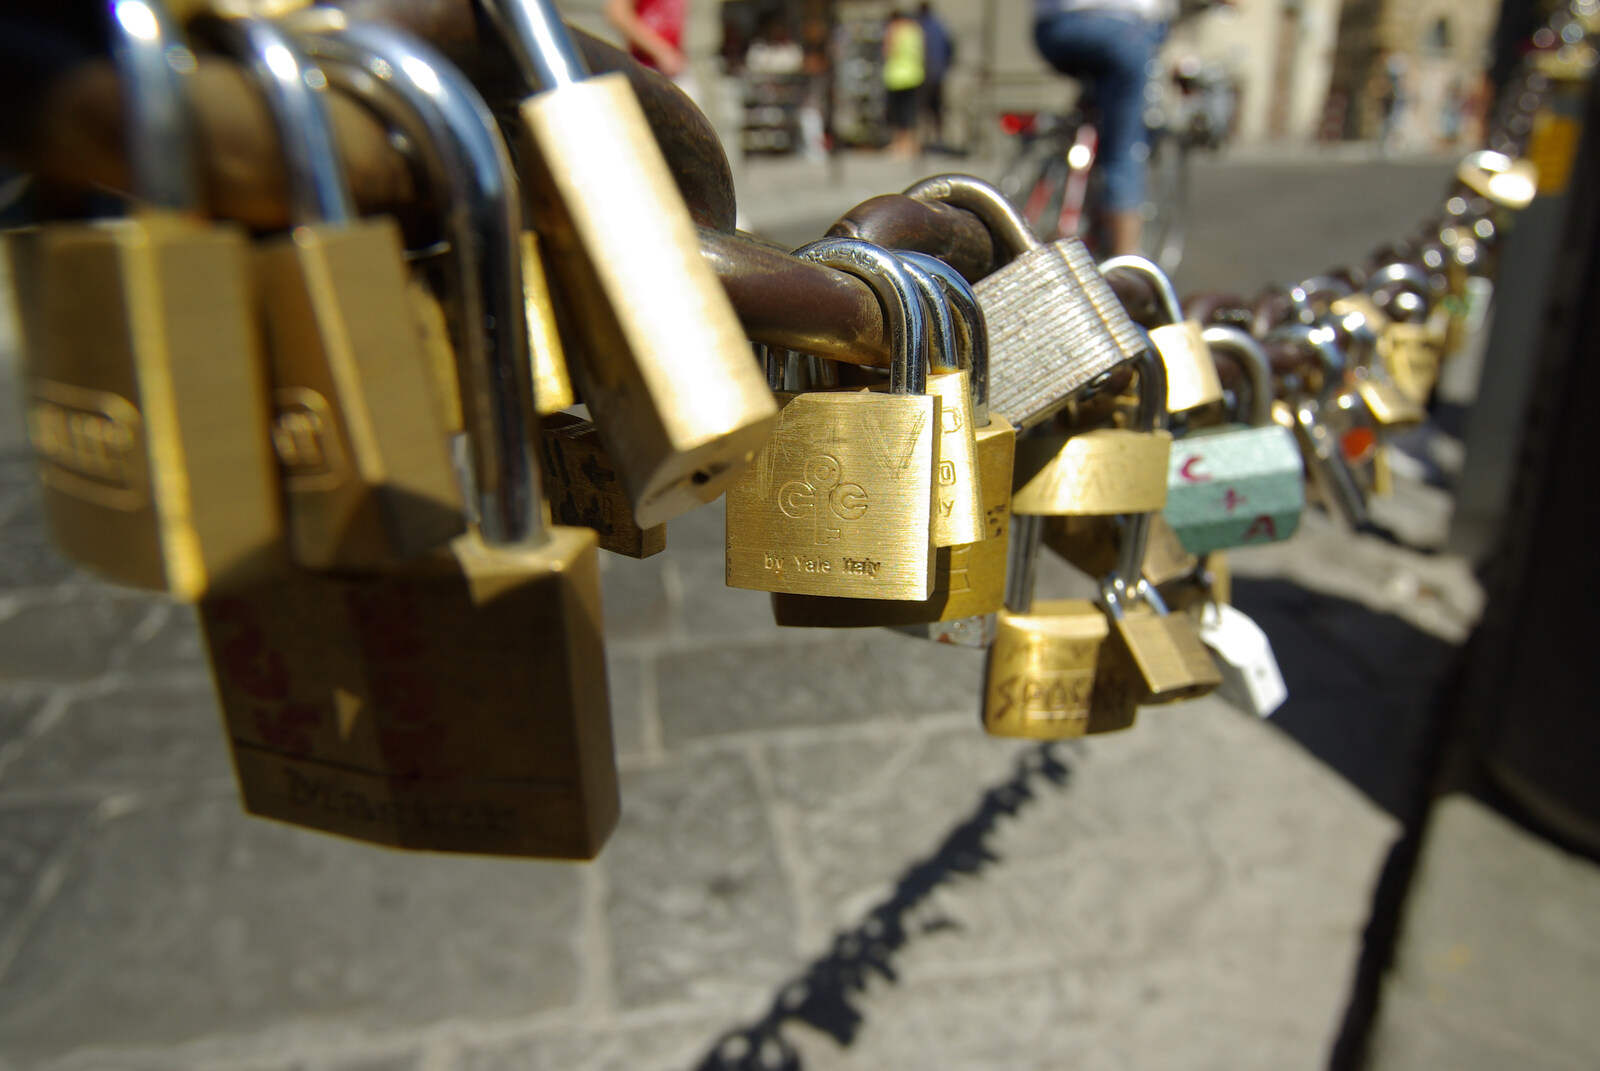 A Day Trip to Firenze, Tuscany, Italy - 24th July 2008: 'Love padlocks' on a chainlink fence